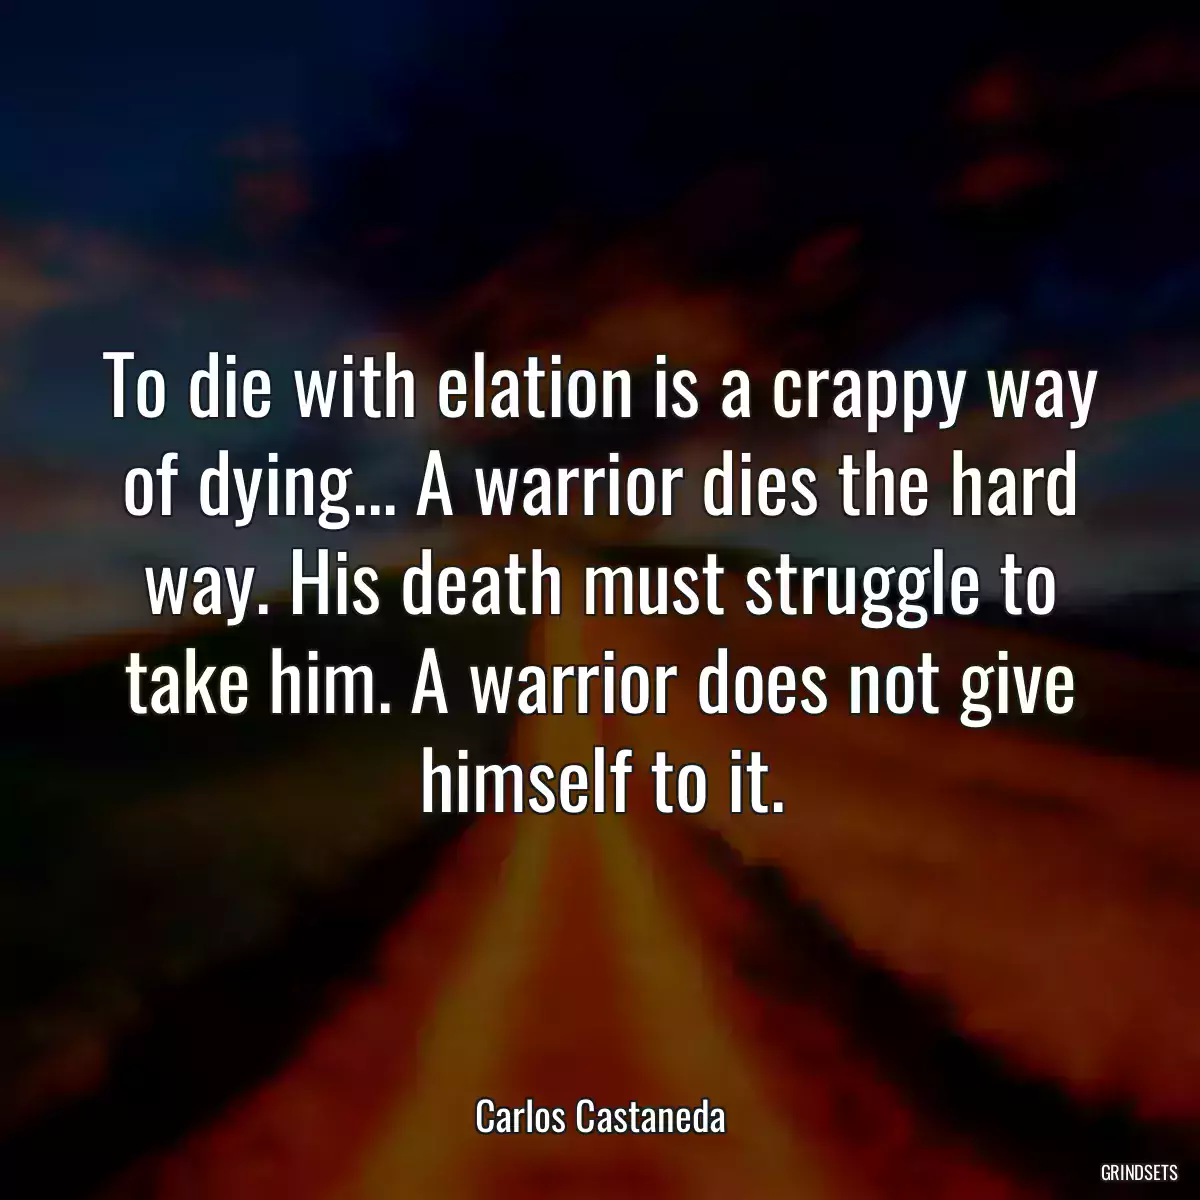 To die with elation is a crappy way of dying... A warrior dies the hard way. His death must struggle to take him. A warrior does not give himself to it.